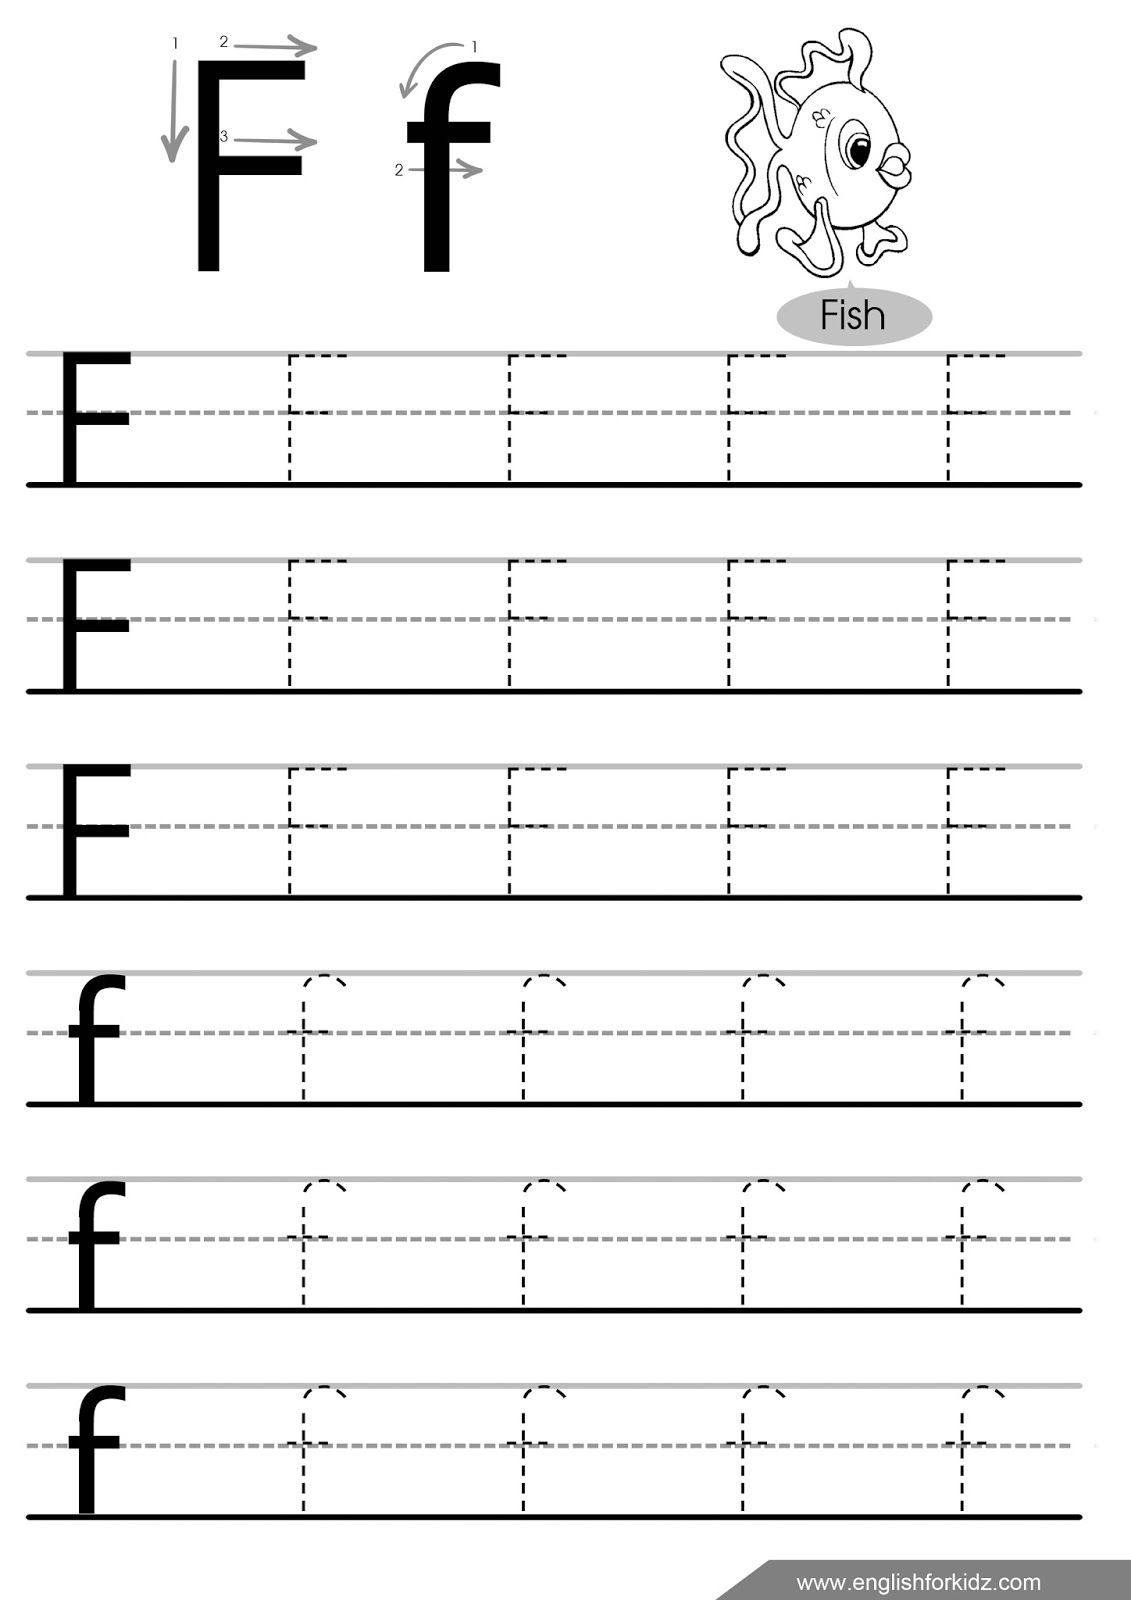 Letter Tracing Worksheets (Letters A - J) regarding Letter F Tracing Page